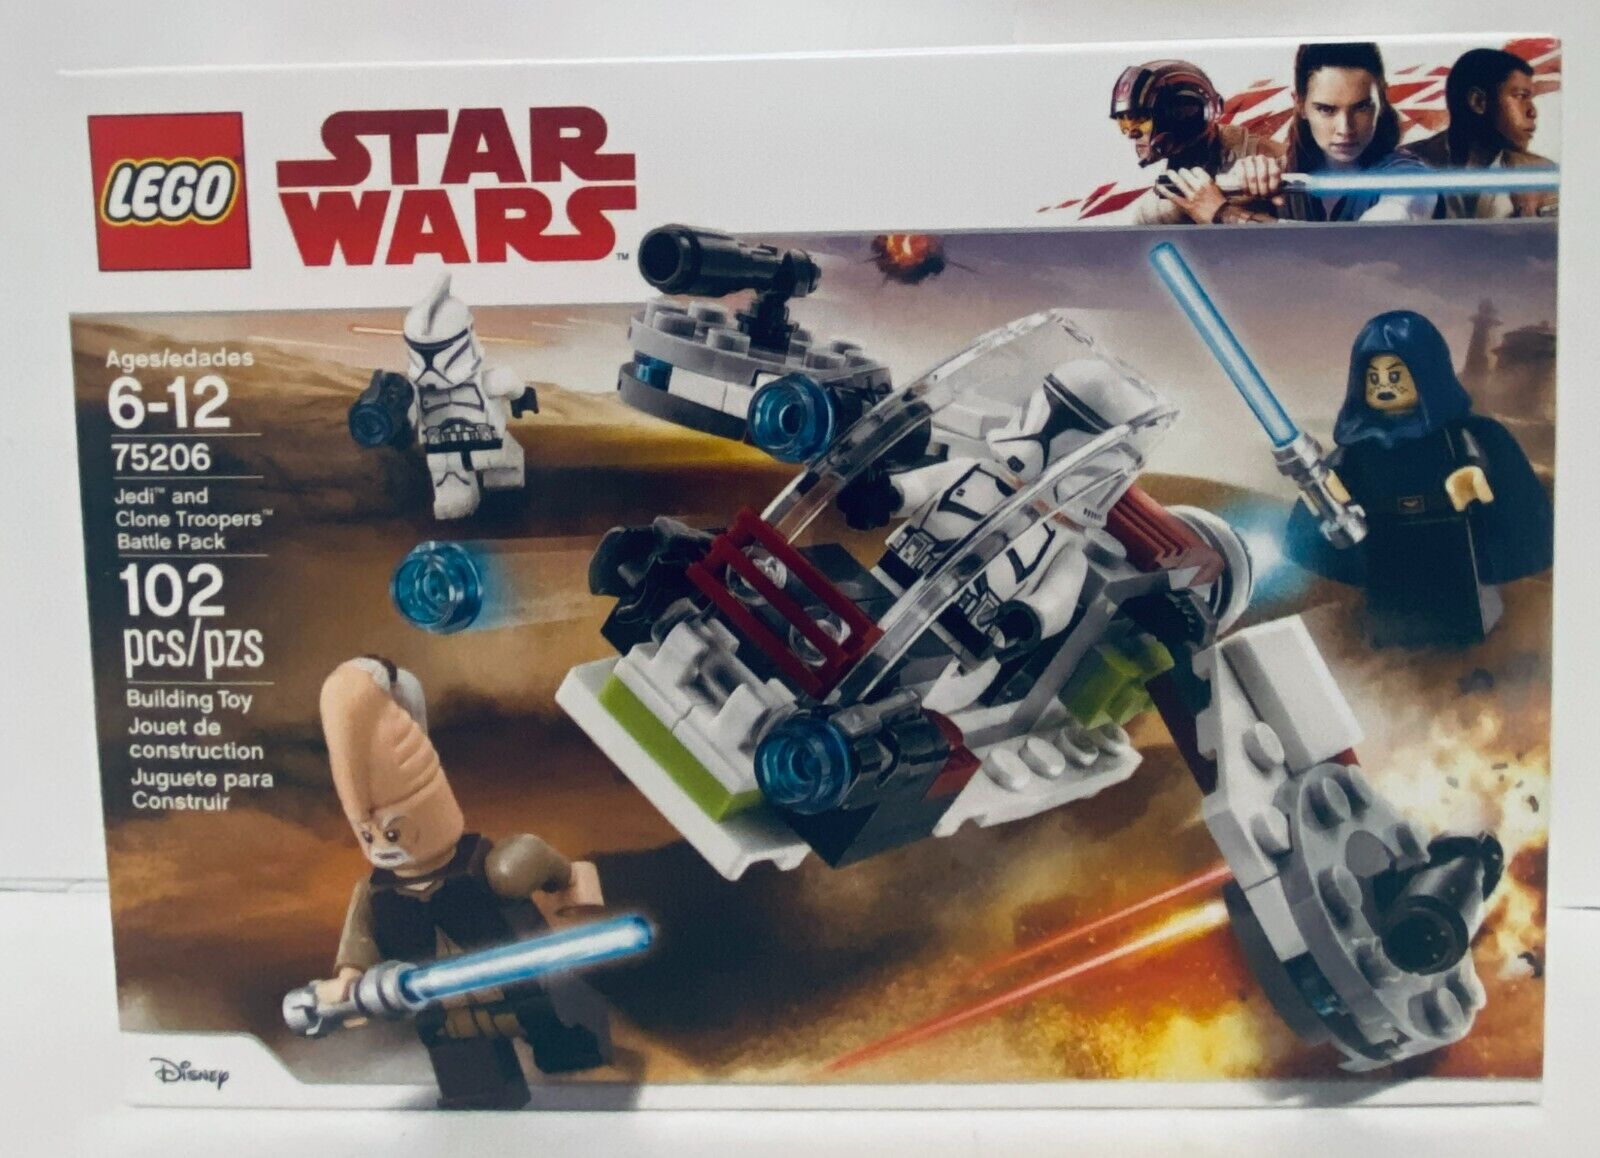 Brand New Sealed LEGO Star Wars: Jedi and Clone Troopers Battle Pack (75206)